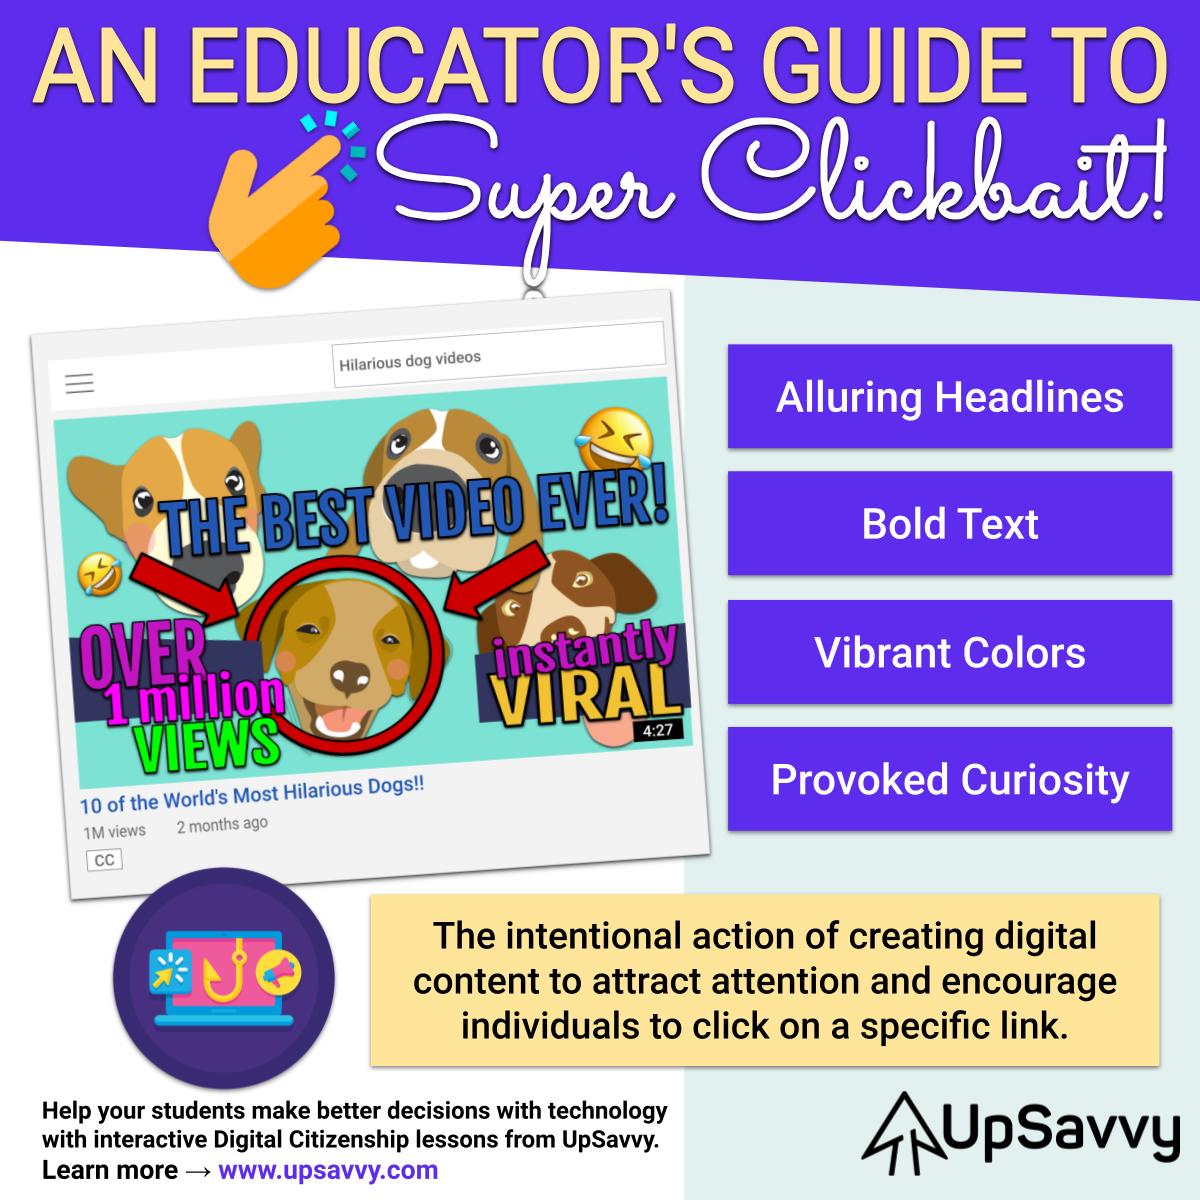 An Educator's Guide to Super Clickbait!